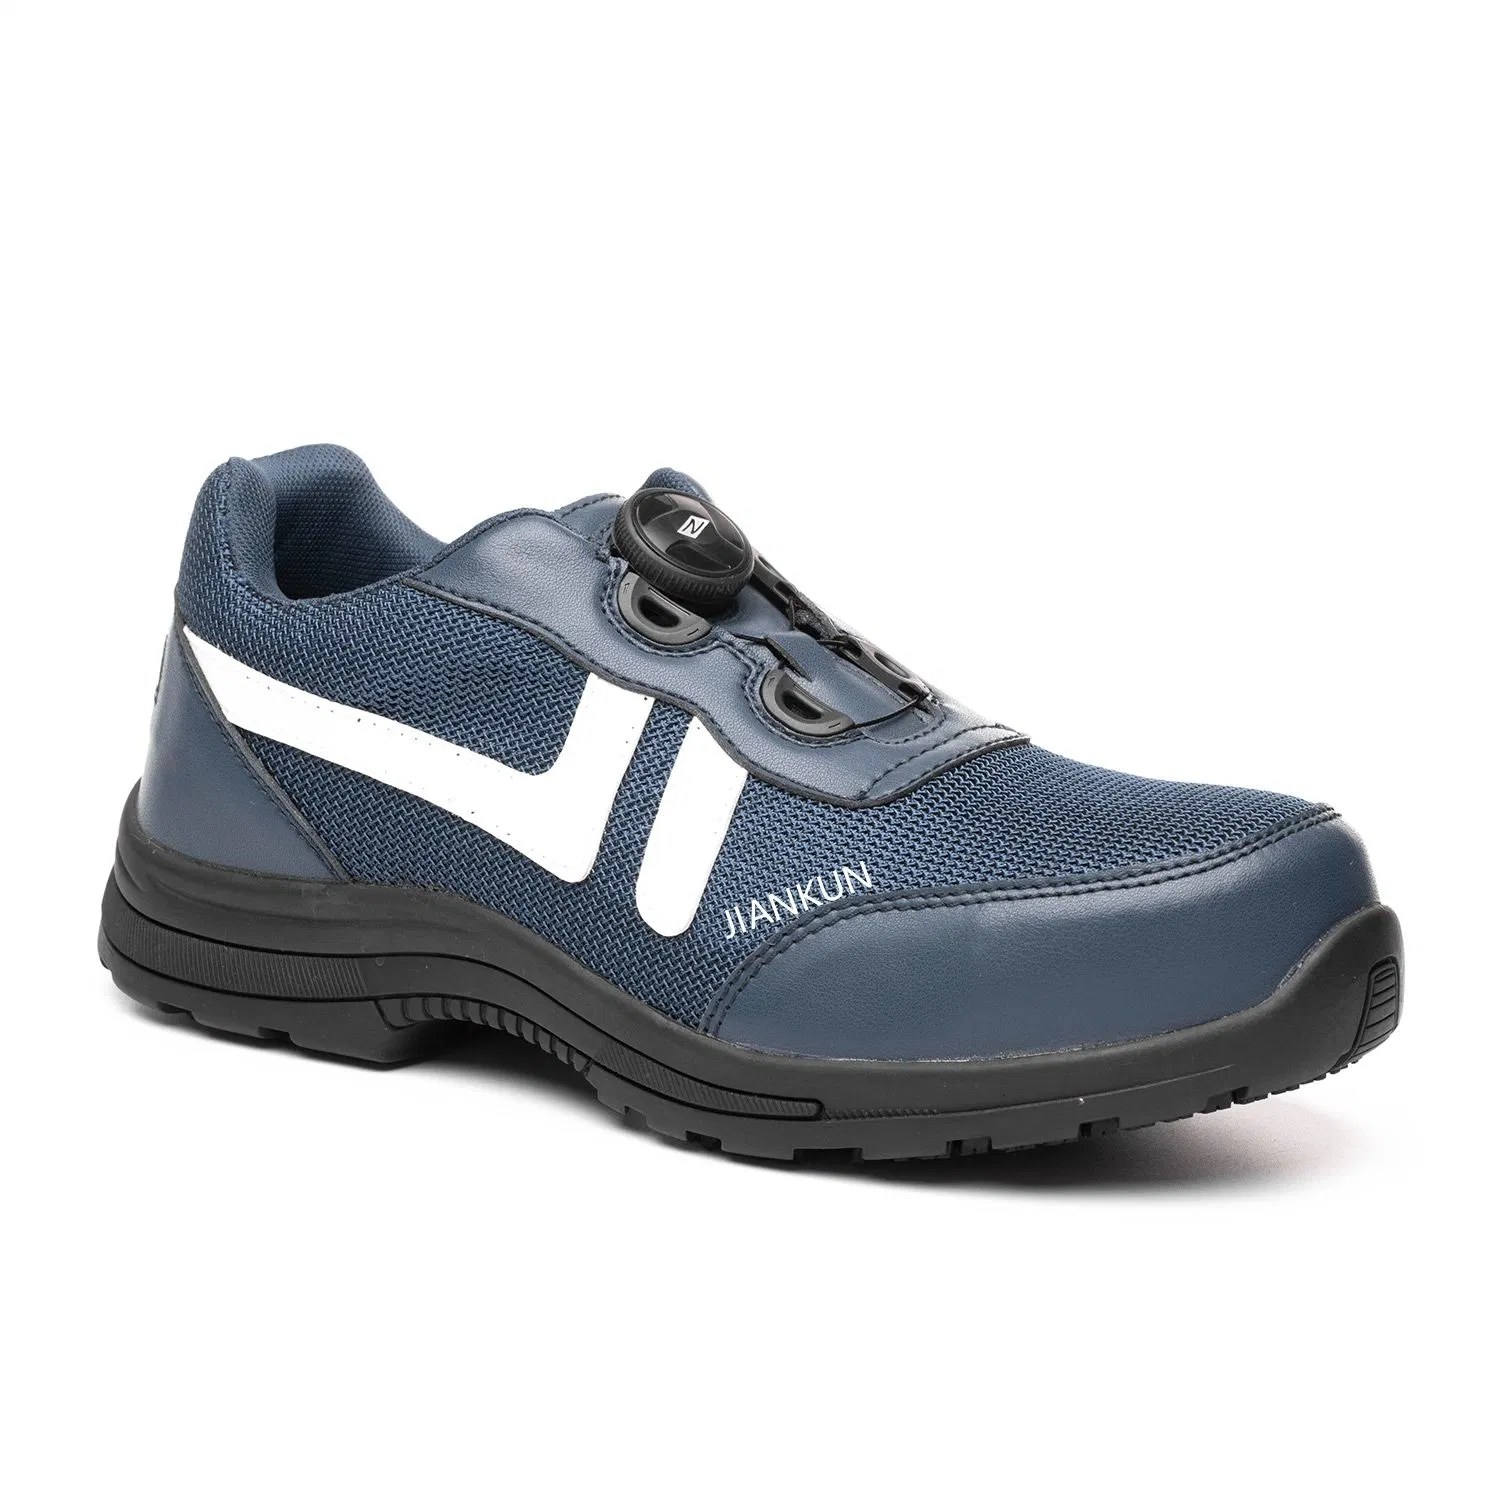 Safety Shoes with Sport Sneaker Style for Women and Men